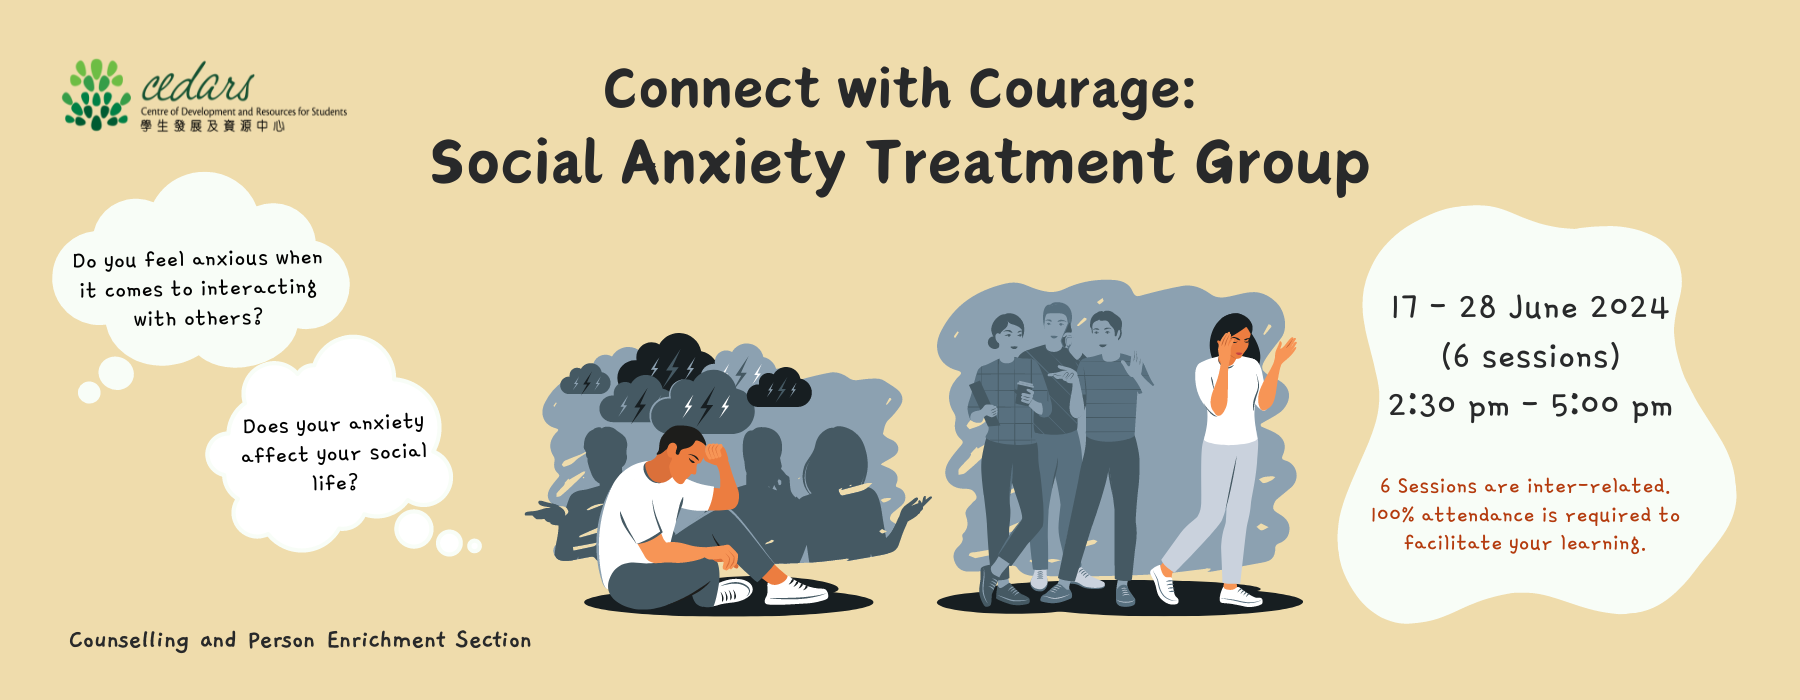 Social Anxiety Treatment Group group